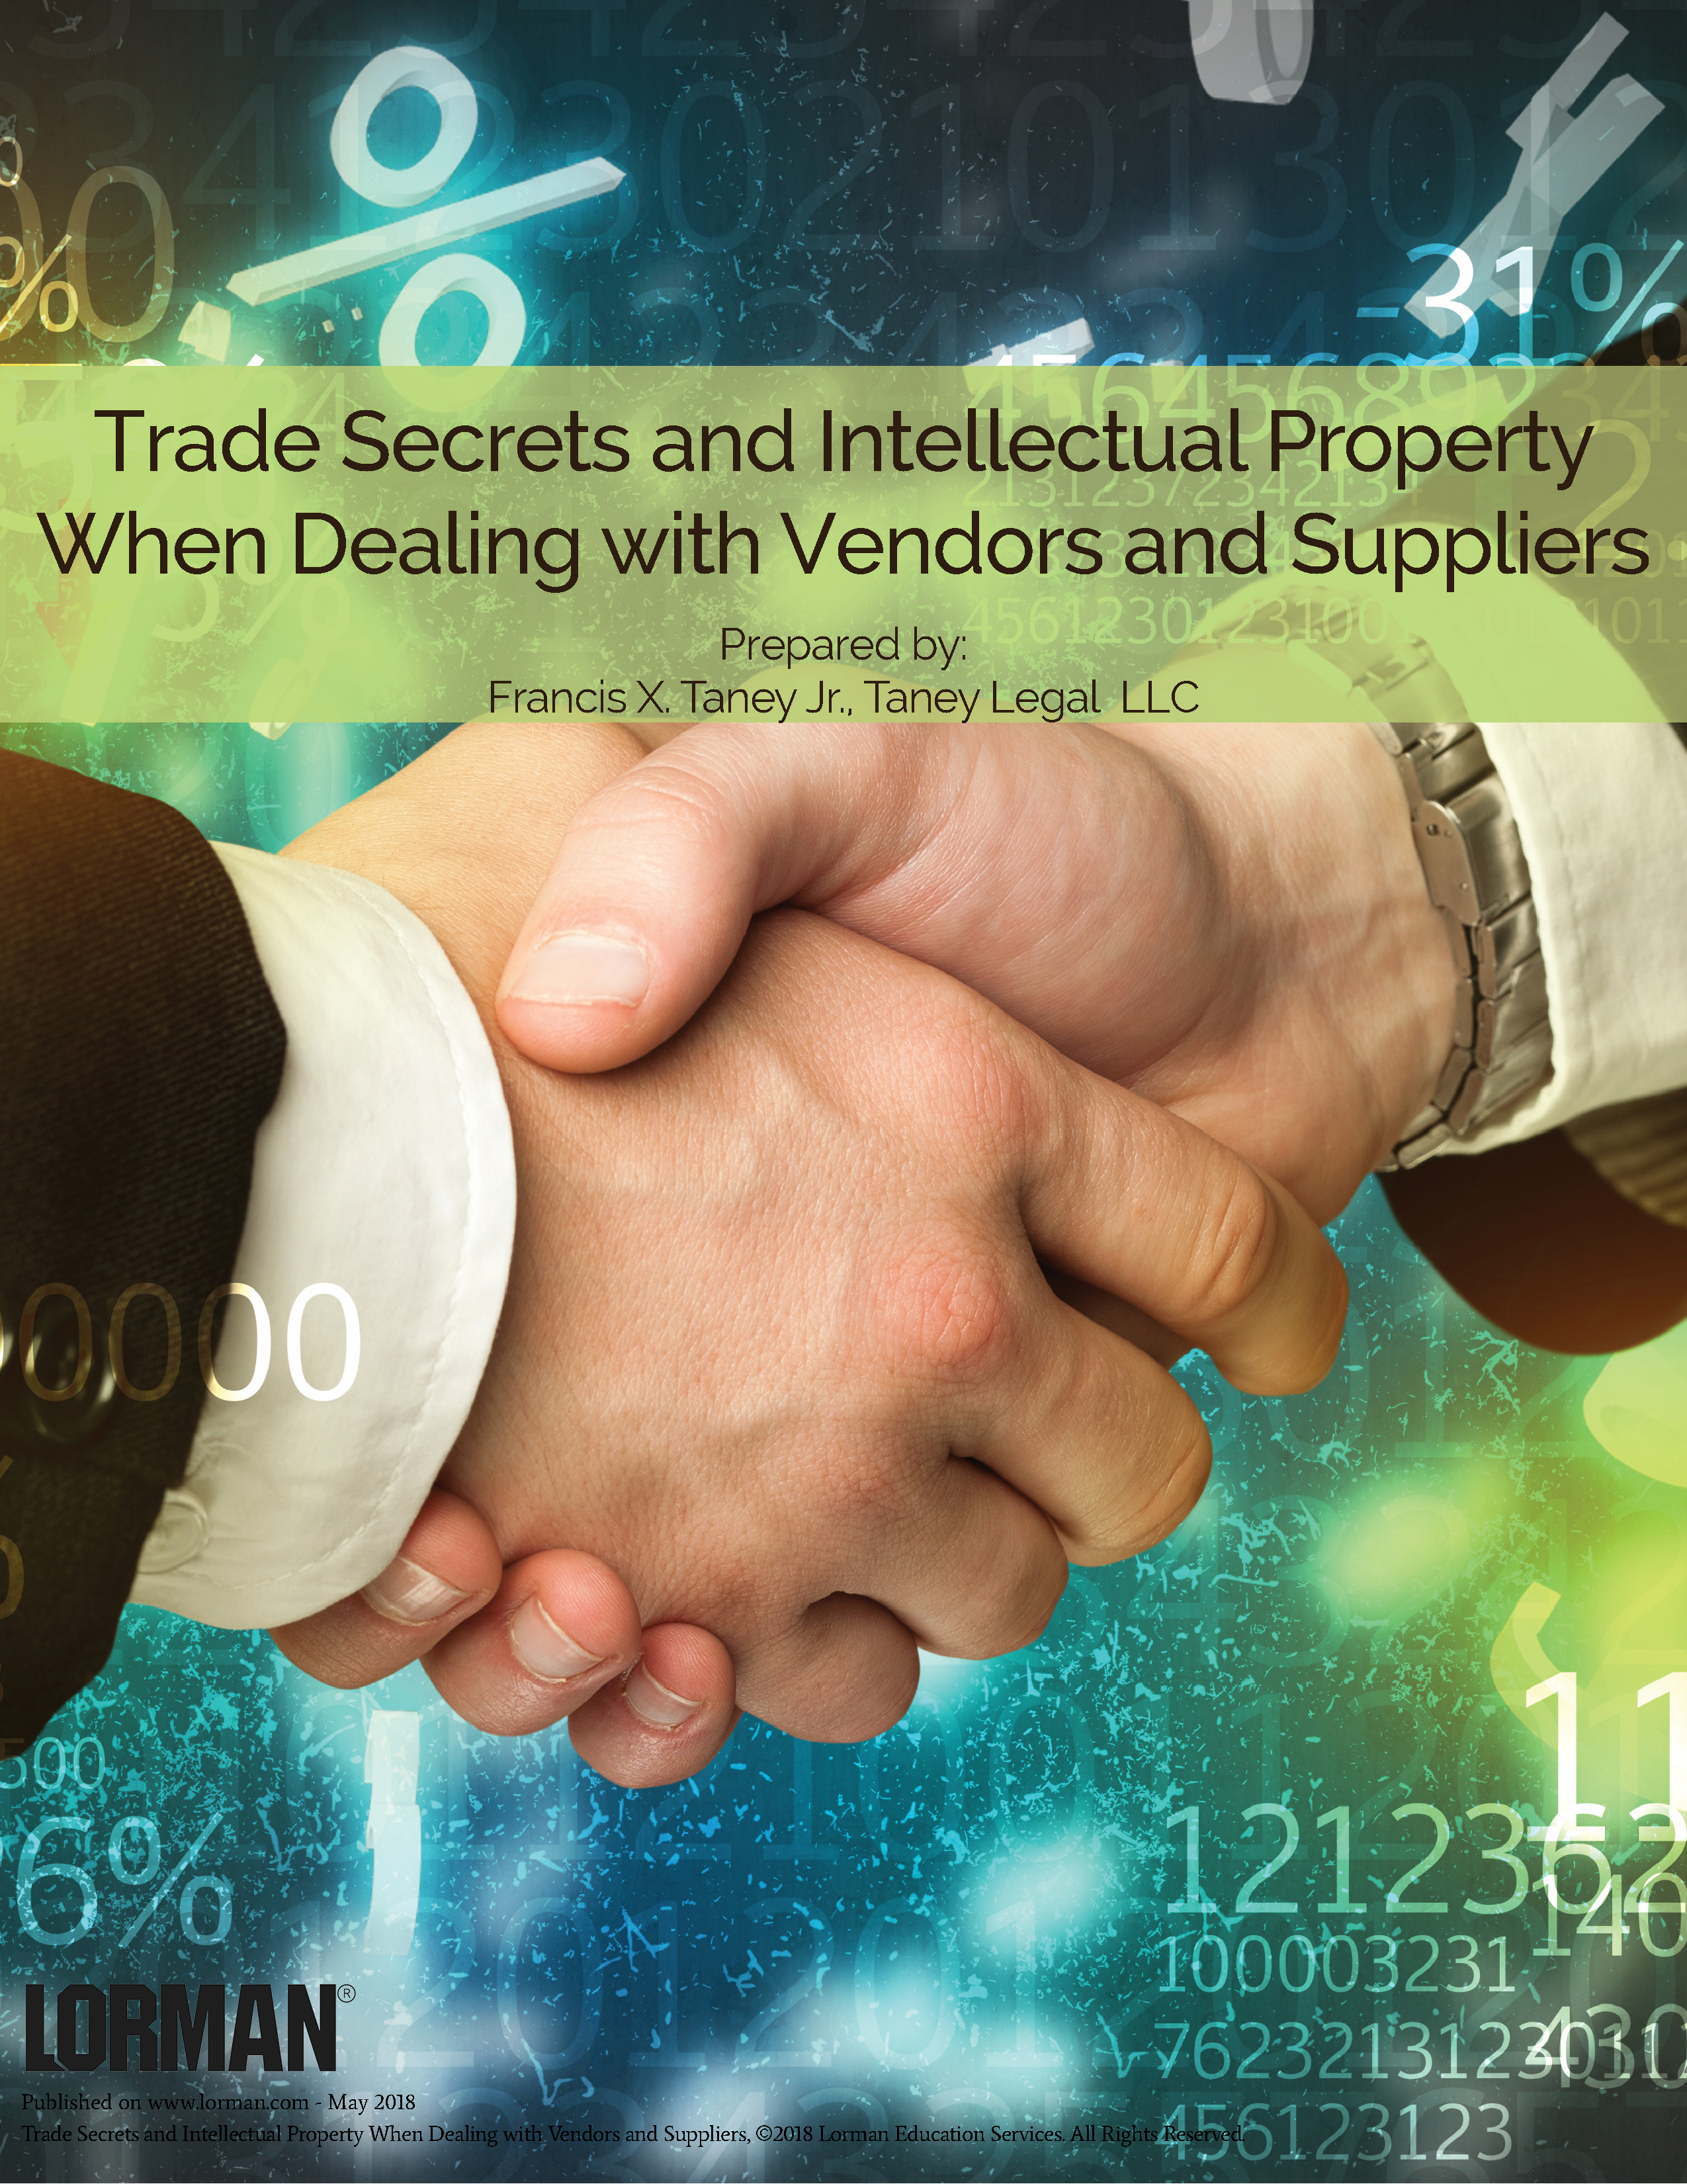 Trade Secrets and Intellectual Property When Dealing with Vendors and Suppliers